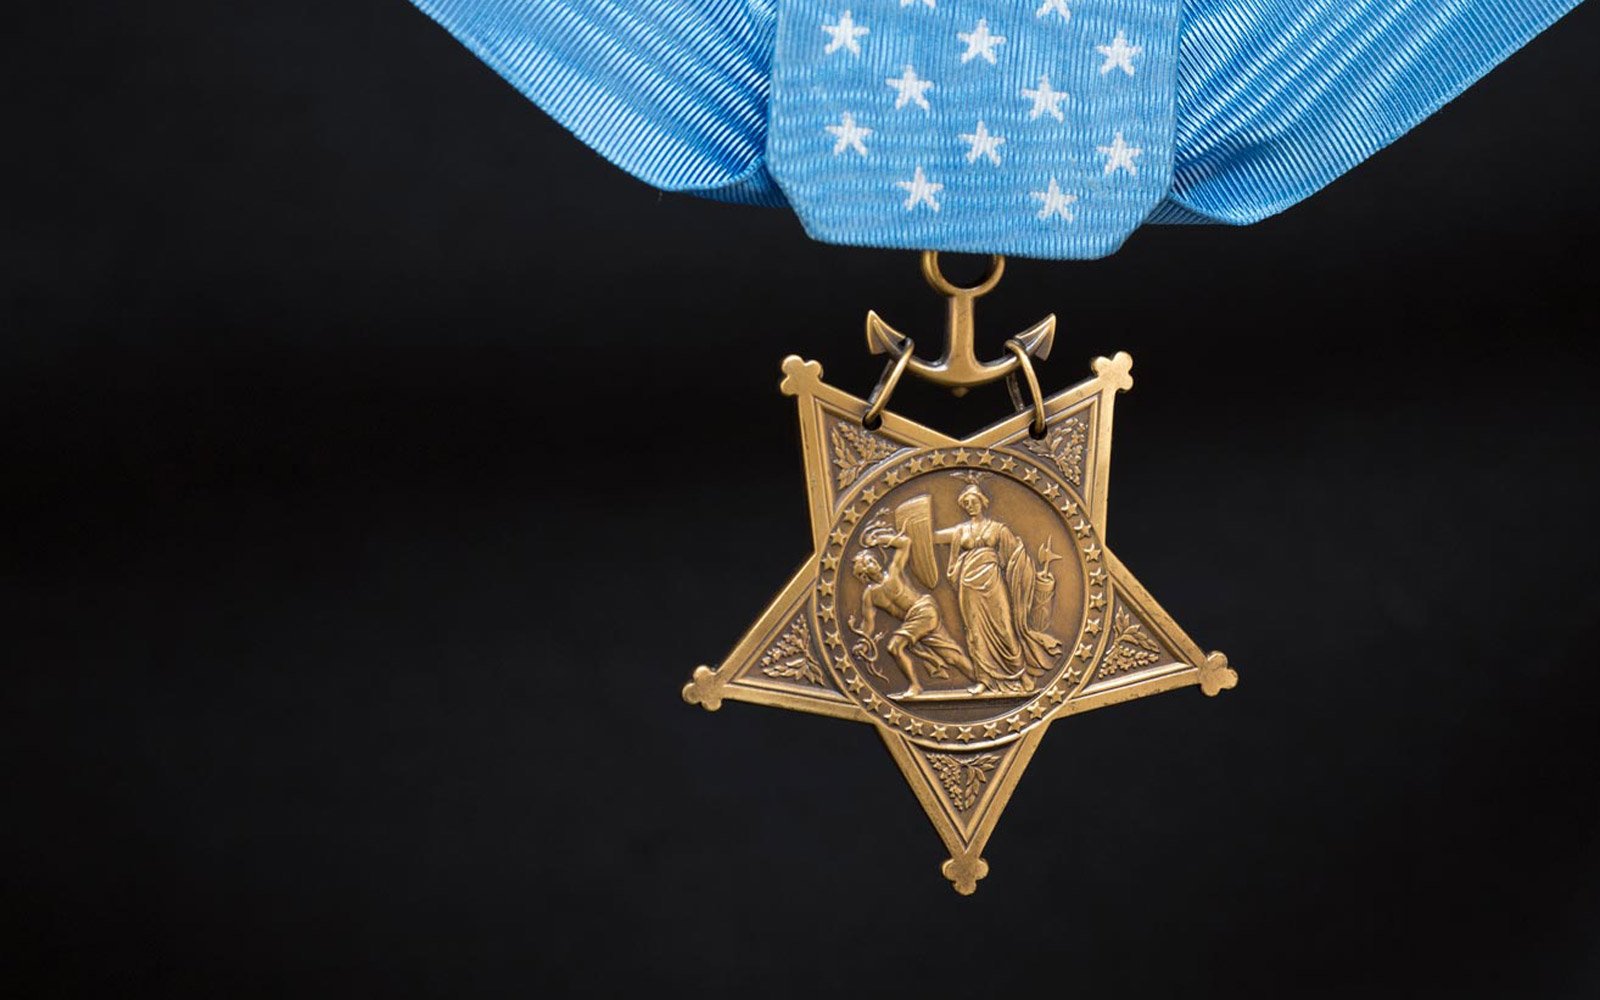 Congressional Medal Of Honor Society Official Website